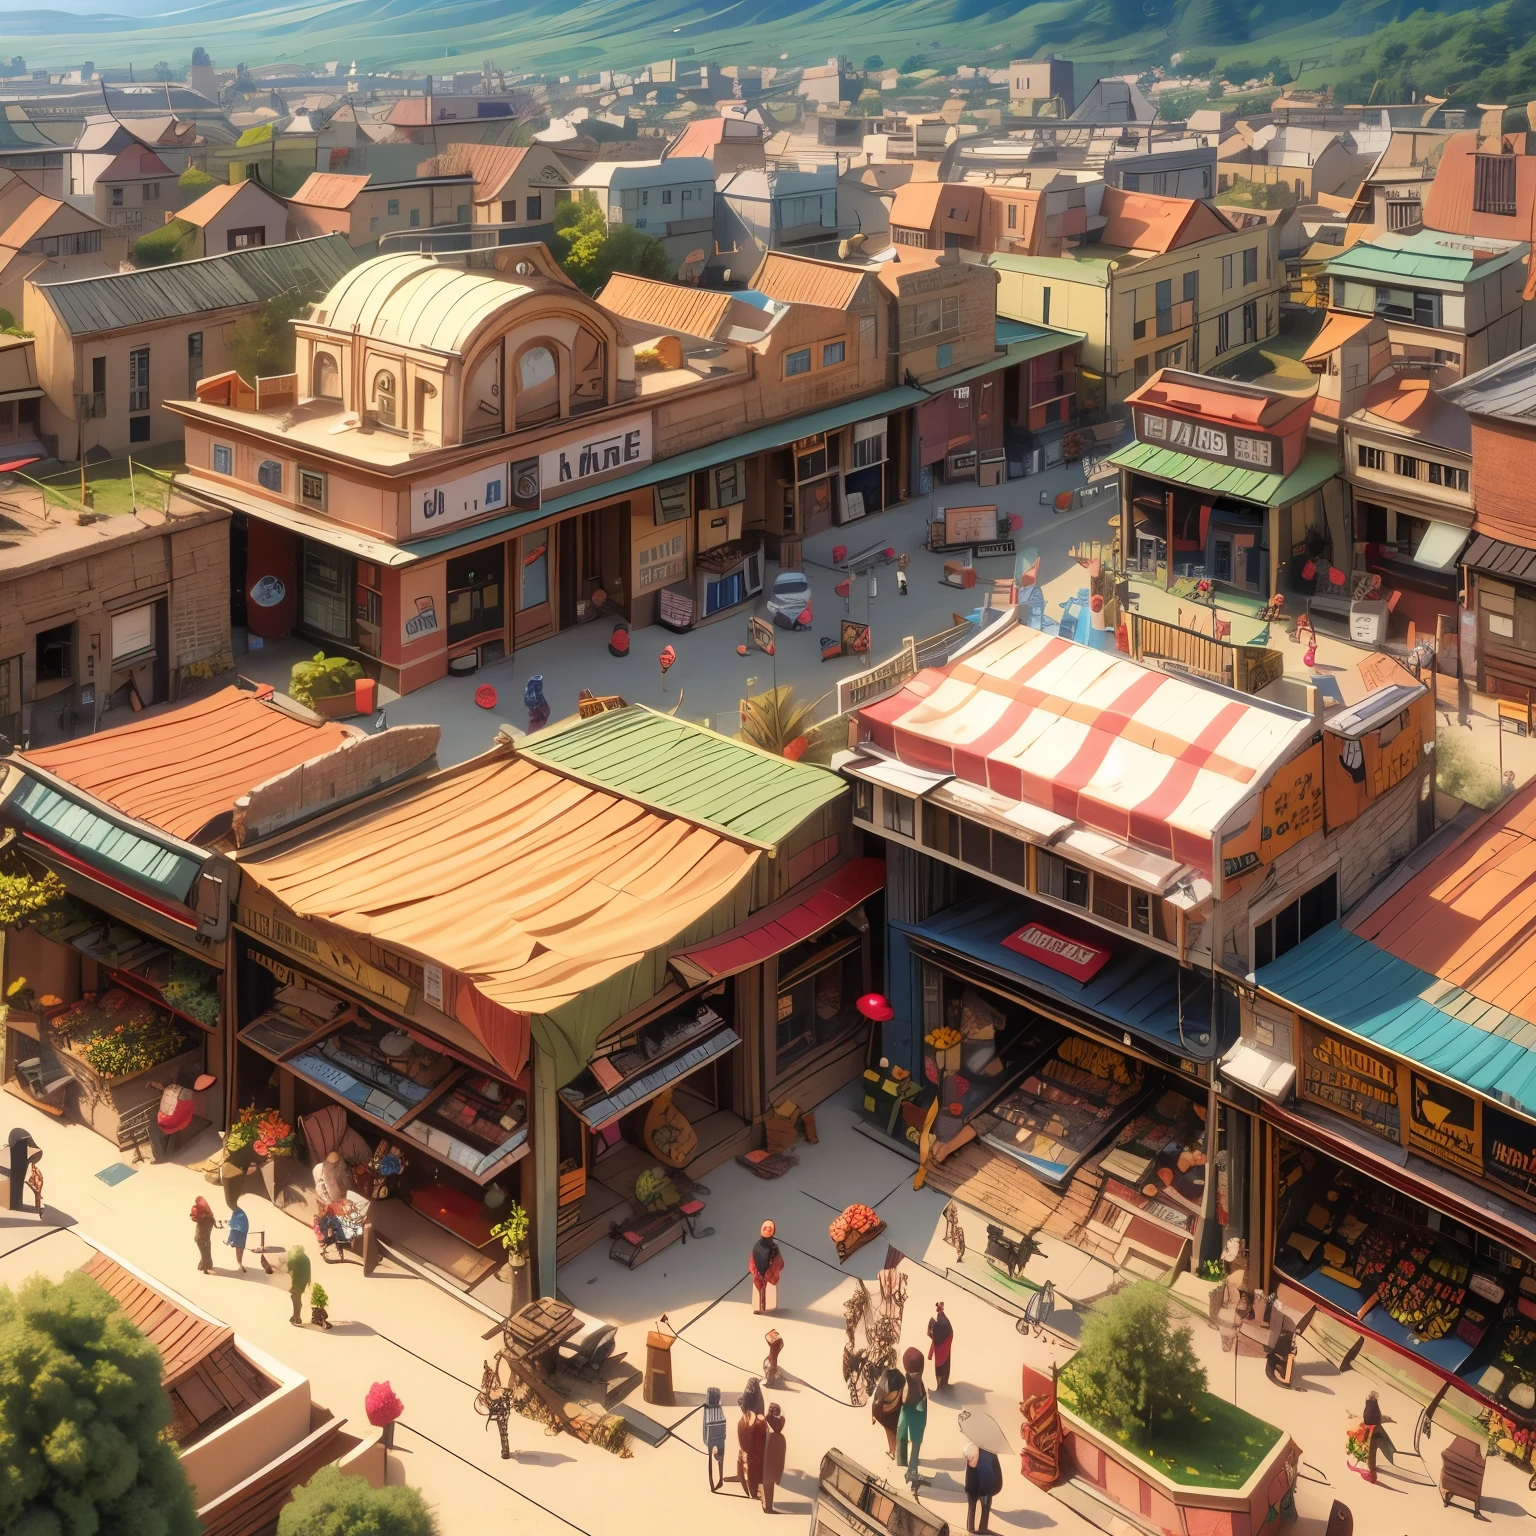 Ariel view of a small town, people on streets, large marketplace.